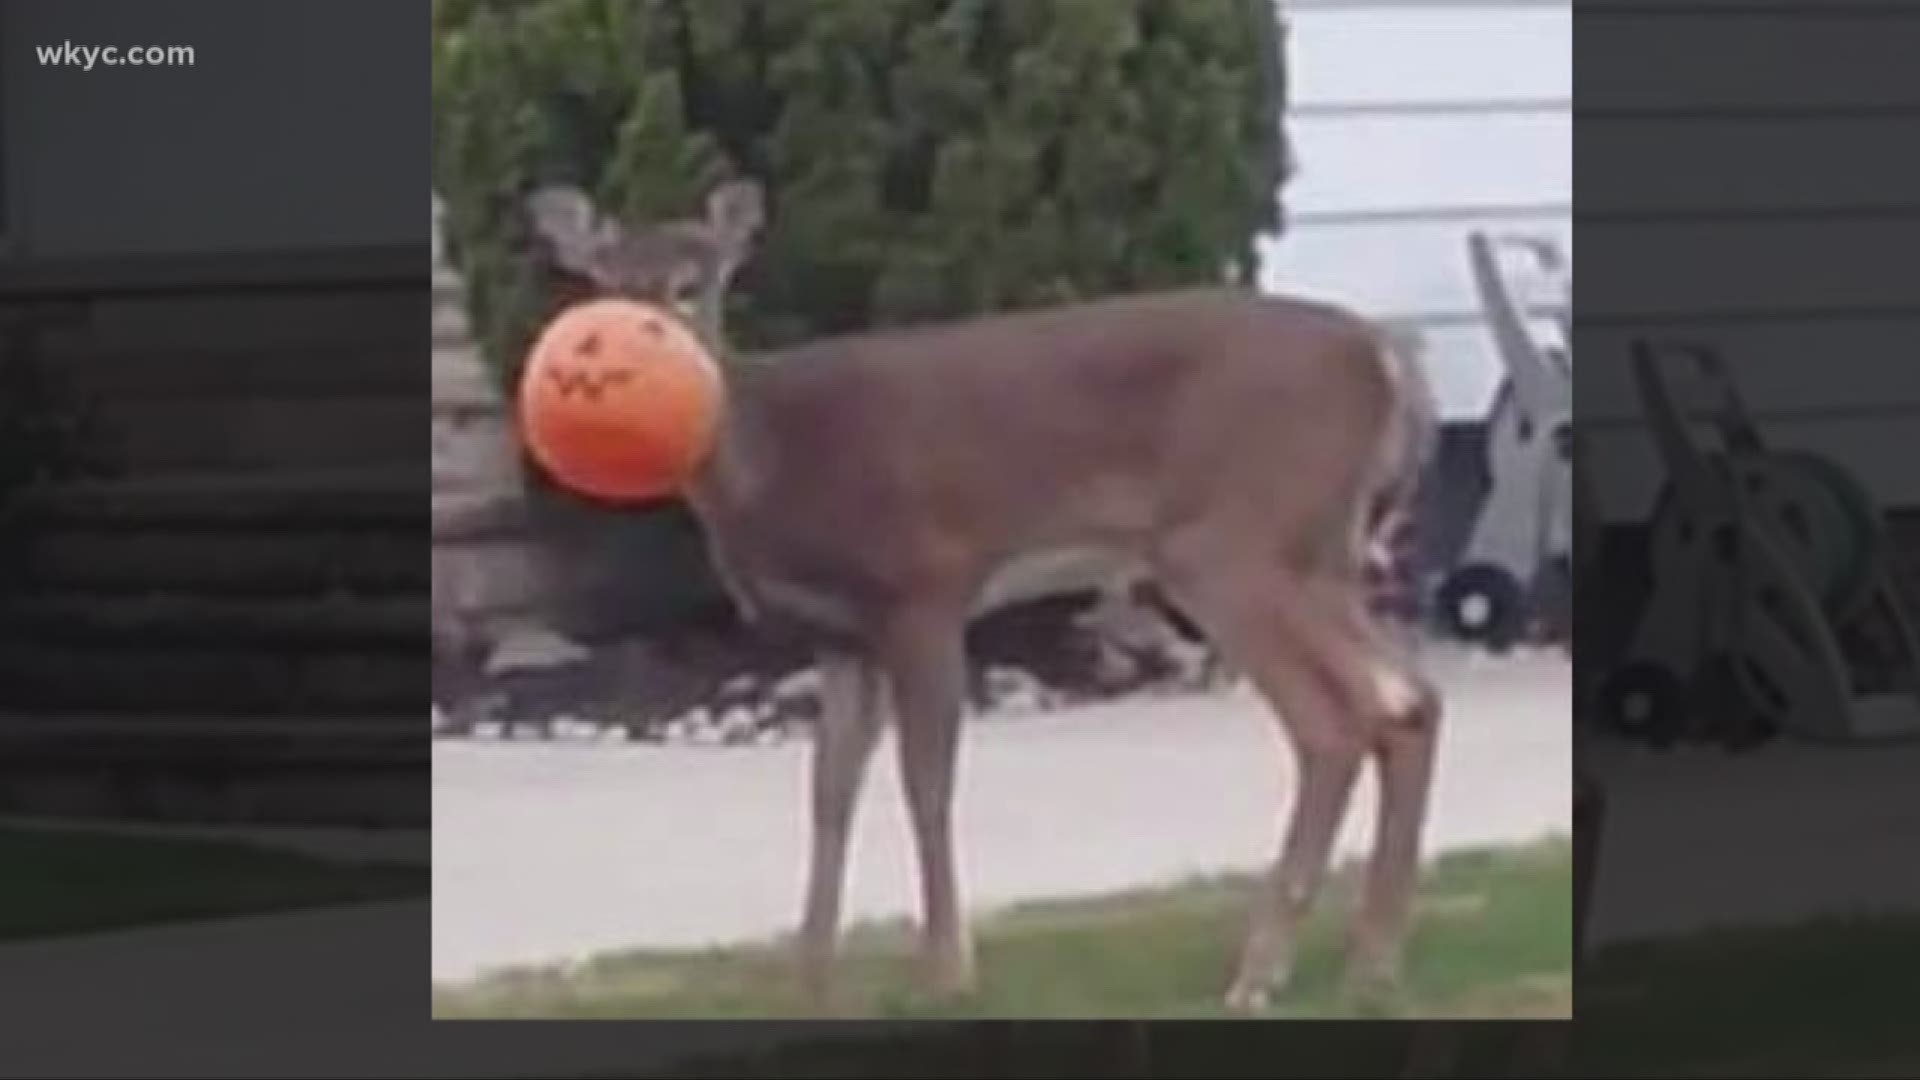 November 2017: A team of neighbors is working to help rescue a deer that has been running around South Euclid unable to eat because it has a plastic Halloween trick-or-treat pumpkin pail stuck on its face.